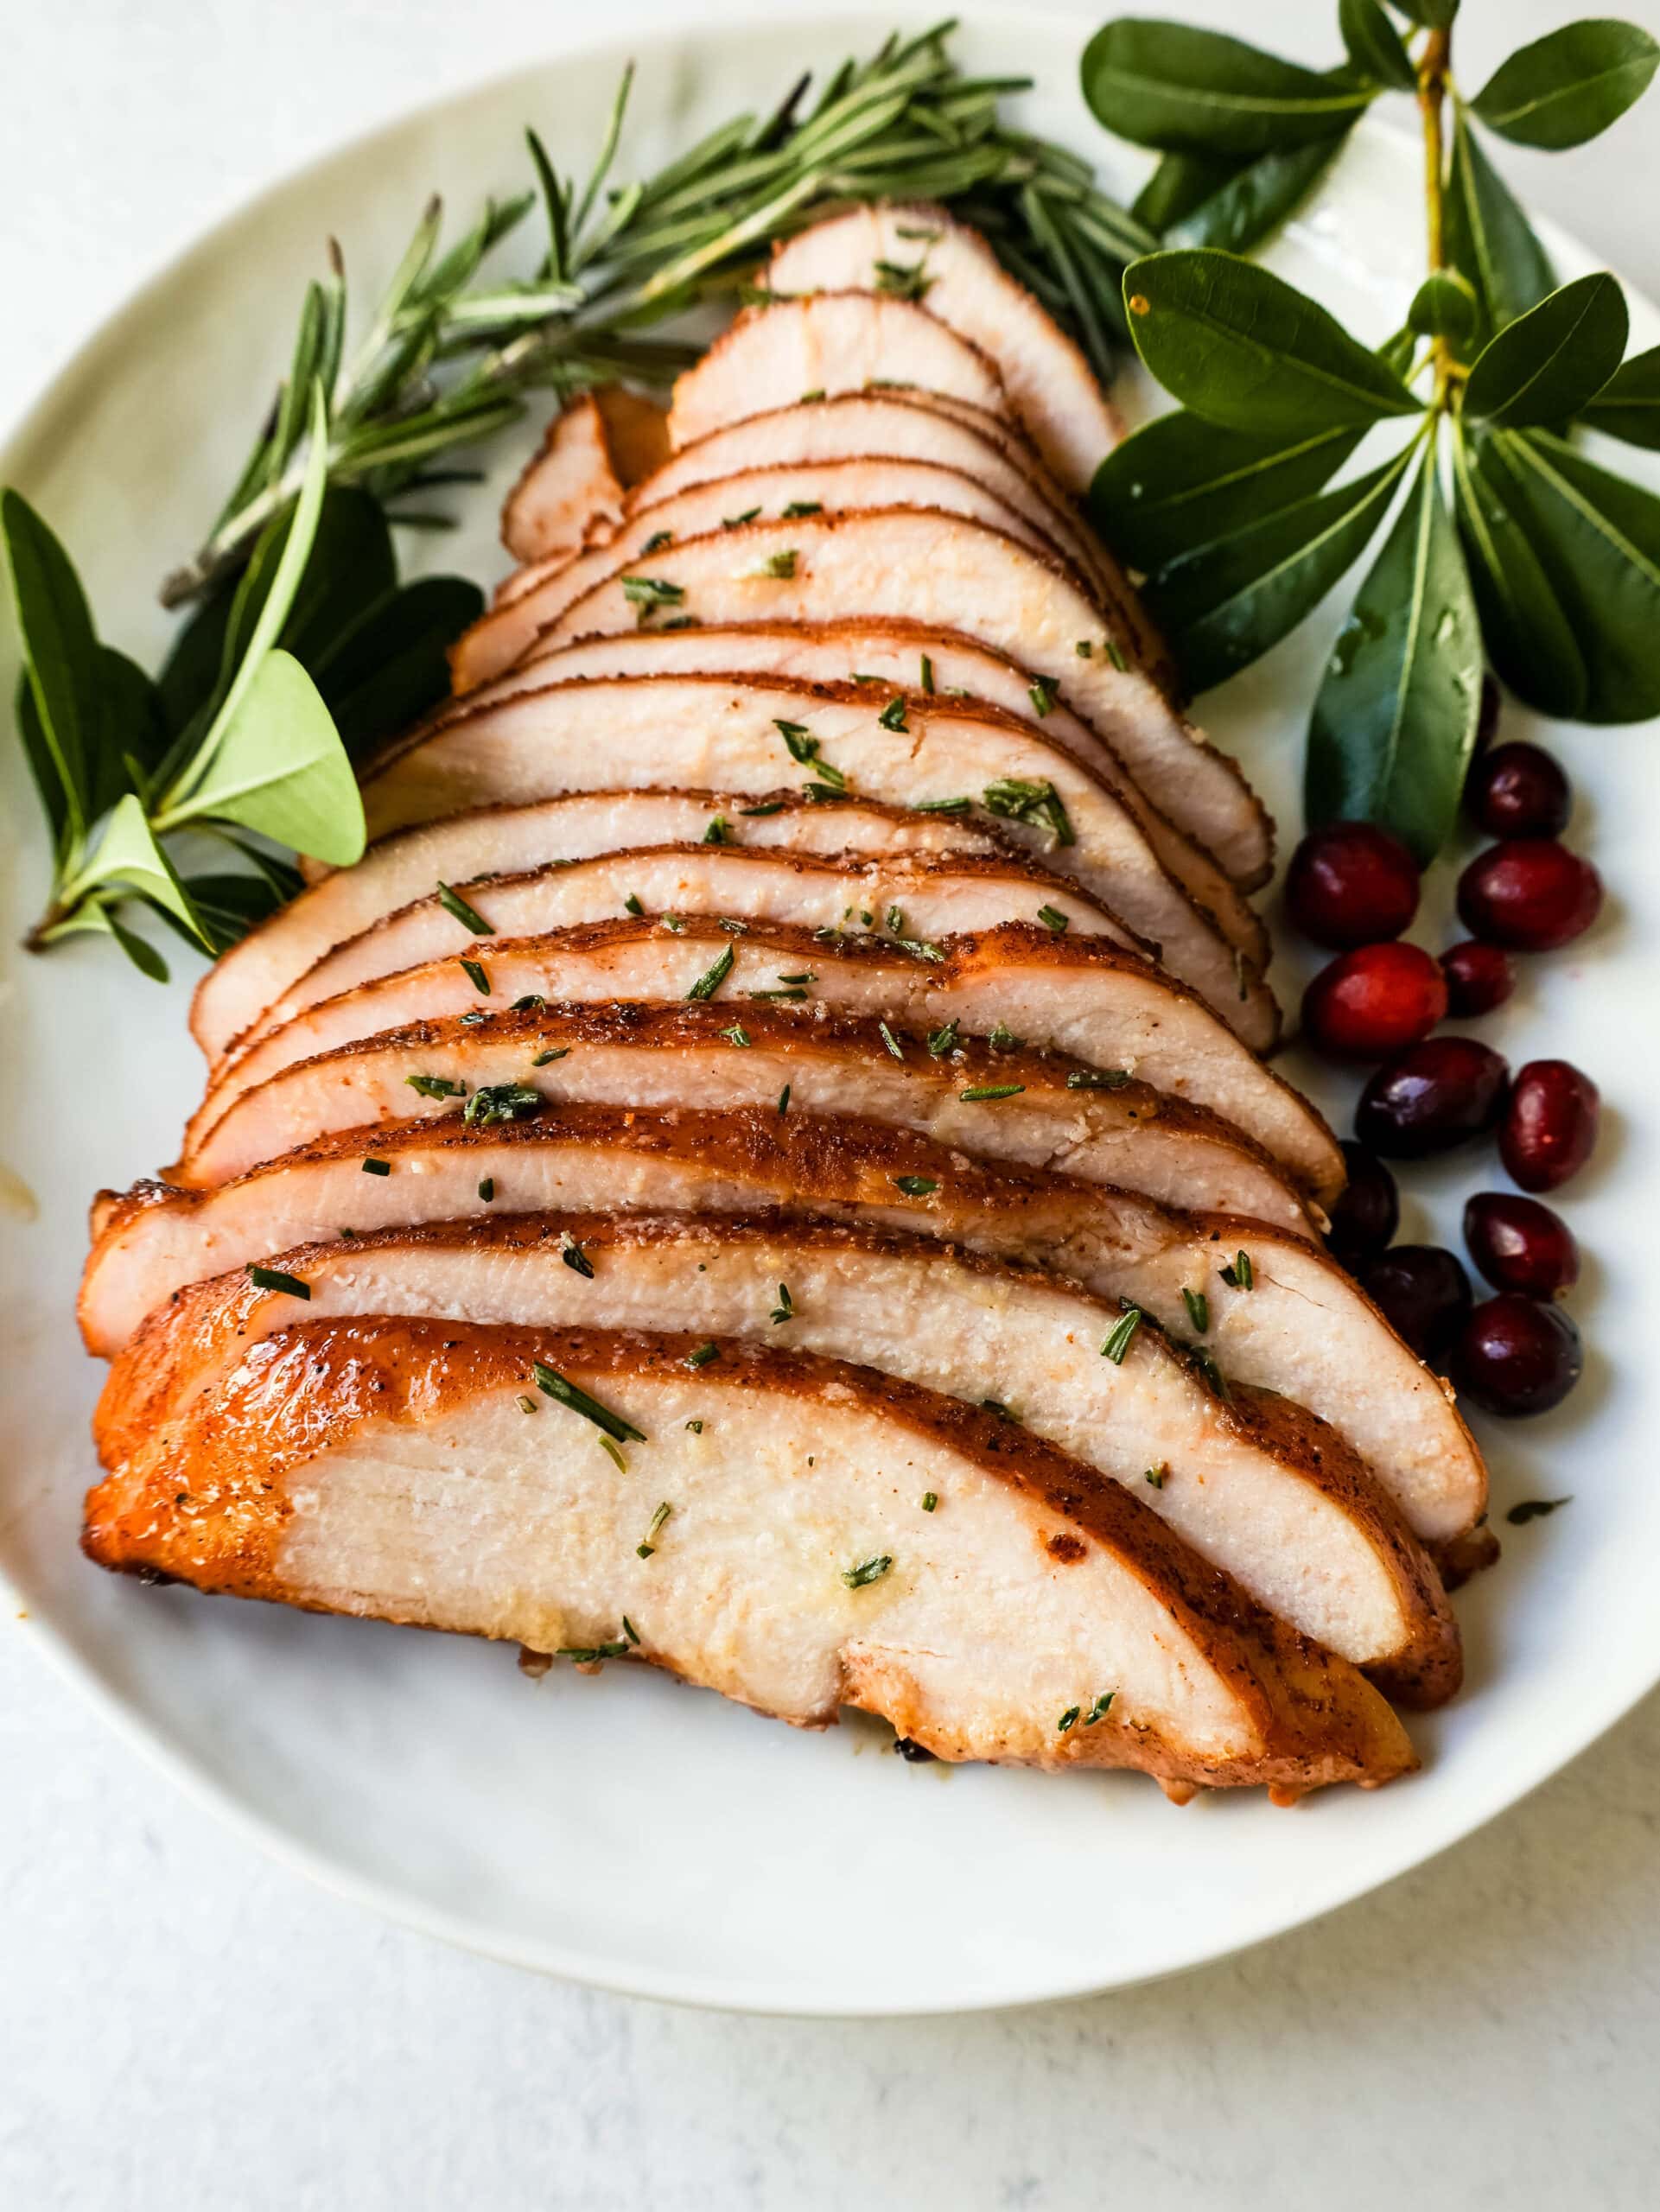 https://www.modernhoney.com/wp-content/uploads/2022/11/Smoked-Turkey-Breast-with-Herb-Butter-8-scaled.jpg